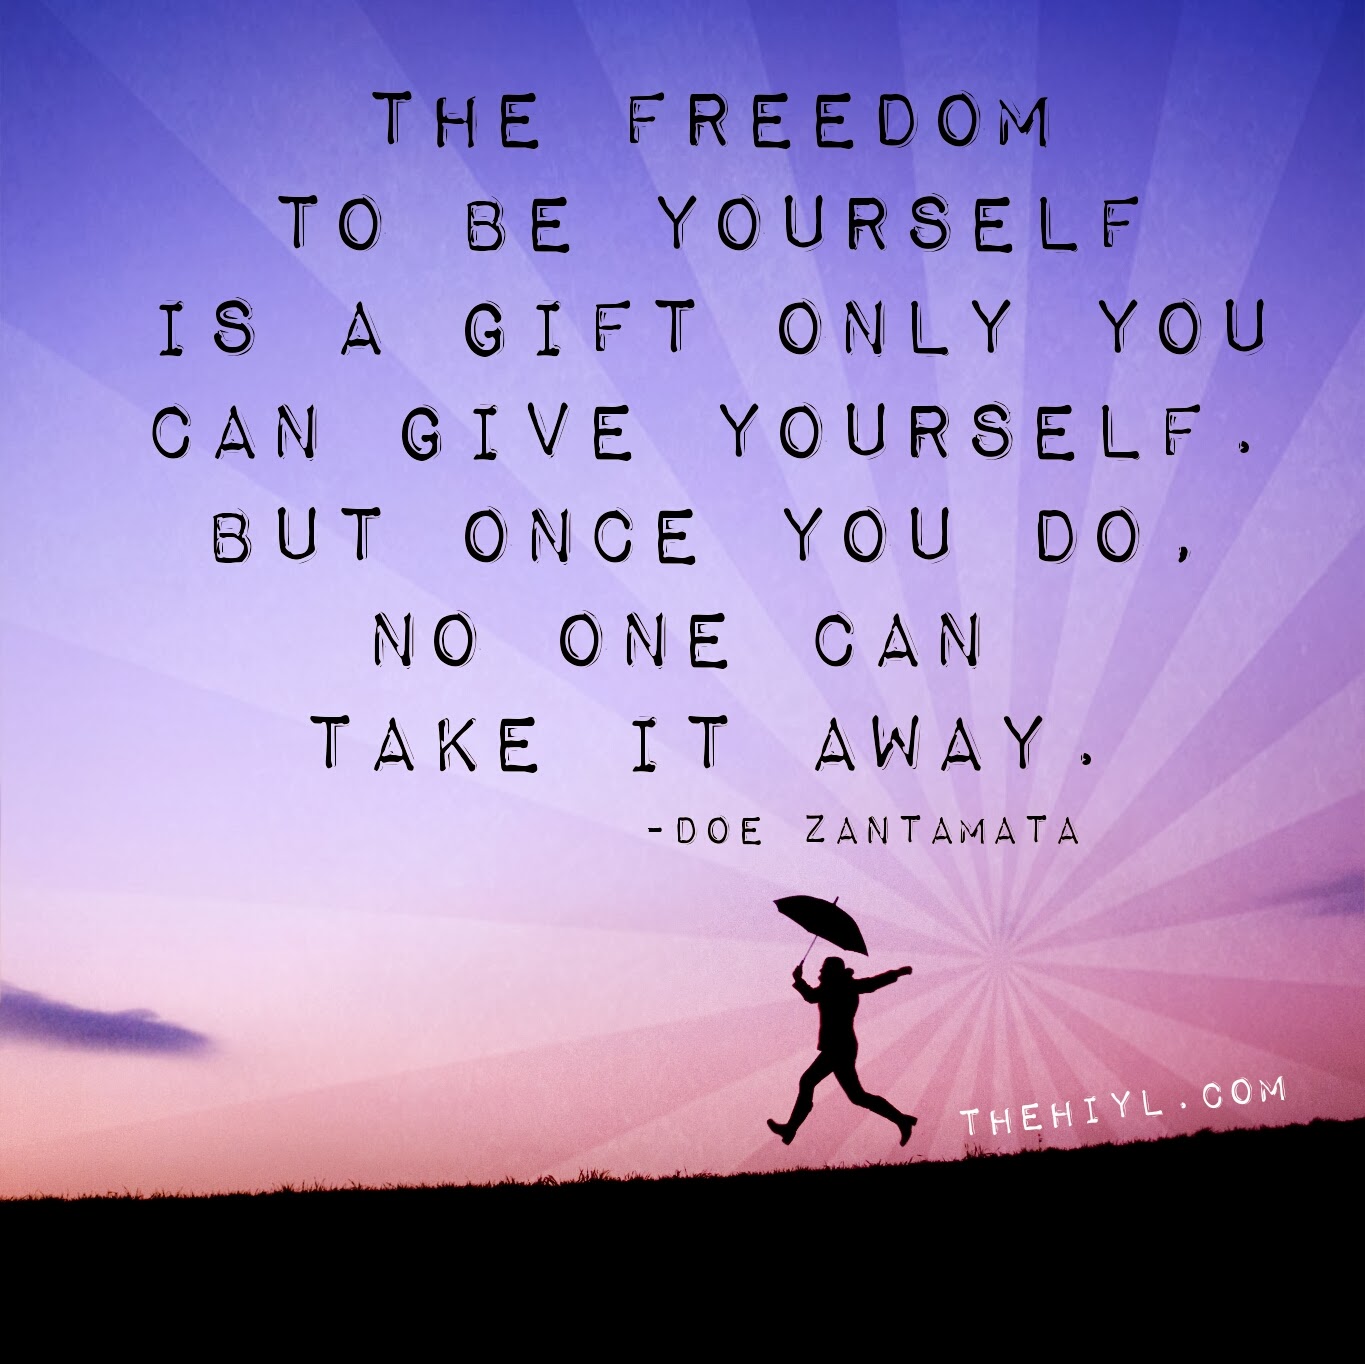 The freedom to be yourself is a gift only you can give yourself. But once you do, no one can take it away. Doe Zantamata